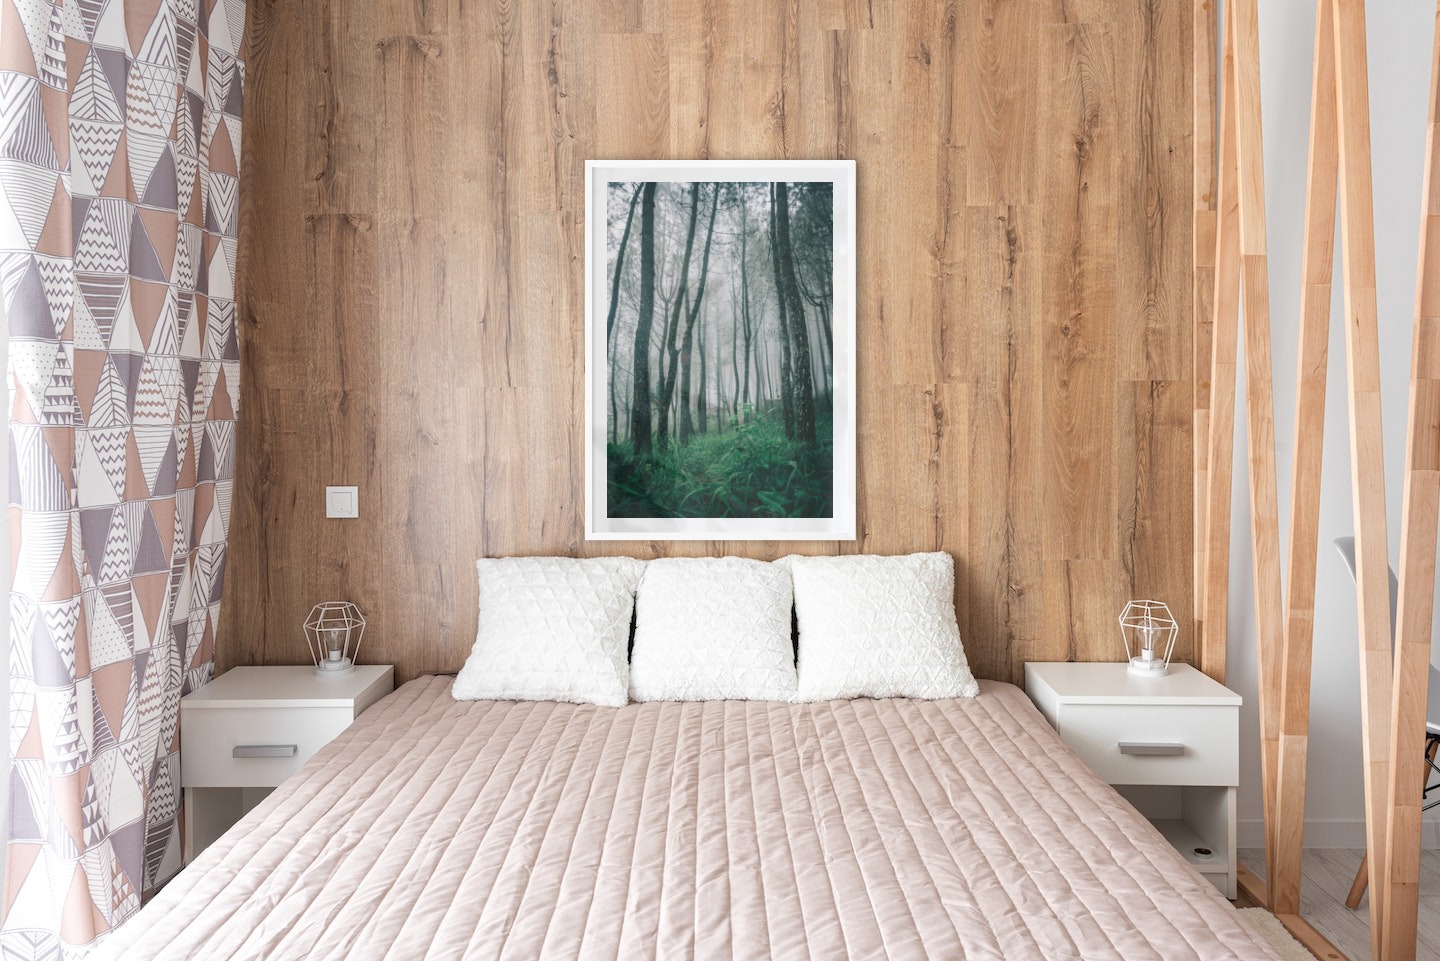 Gallery wall with picture frame in white in size 70x100 with print "Tall trees"